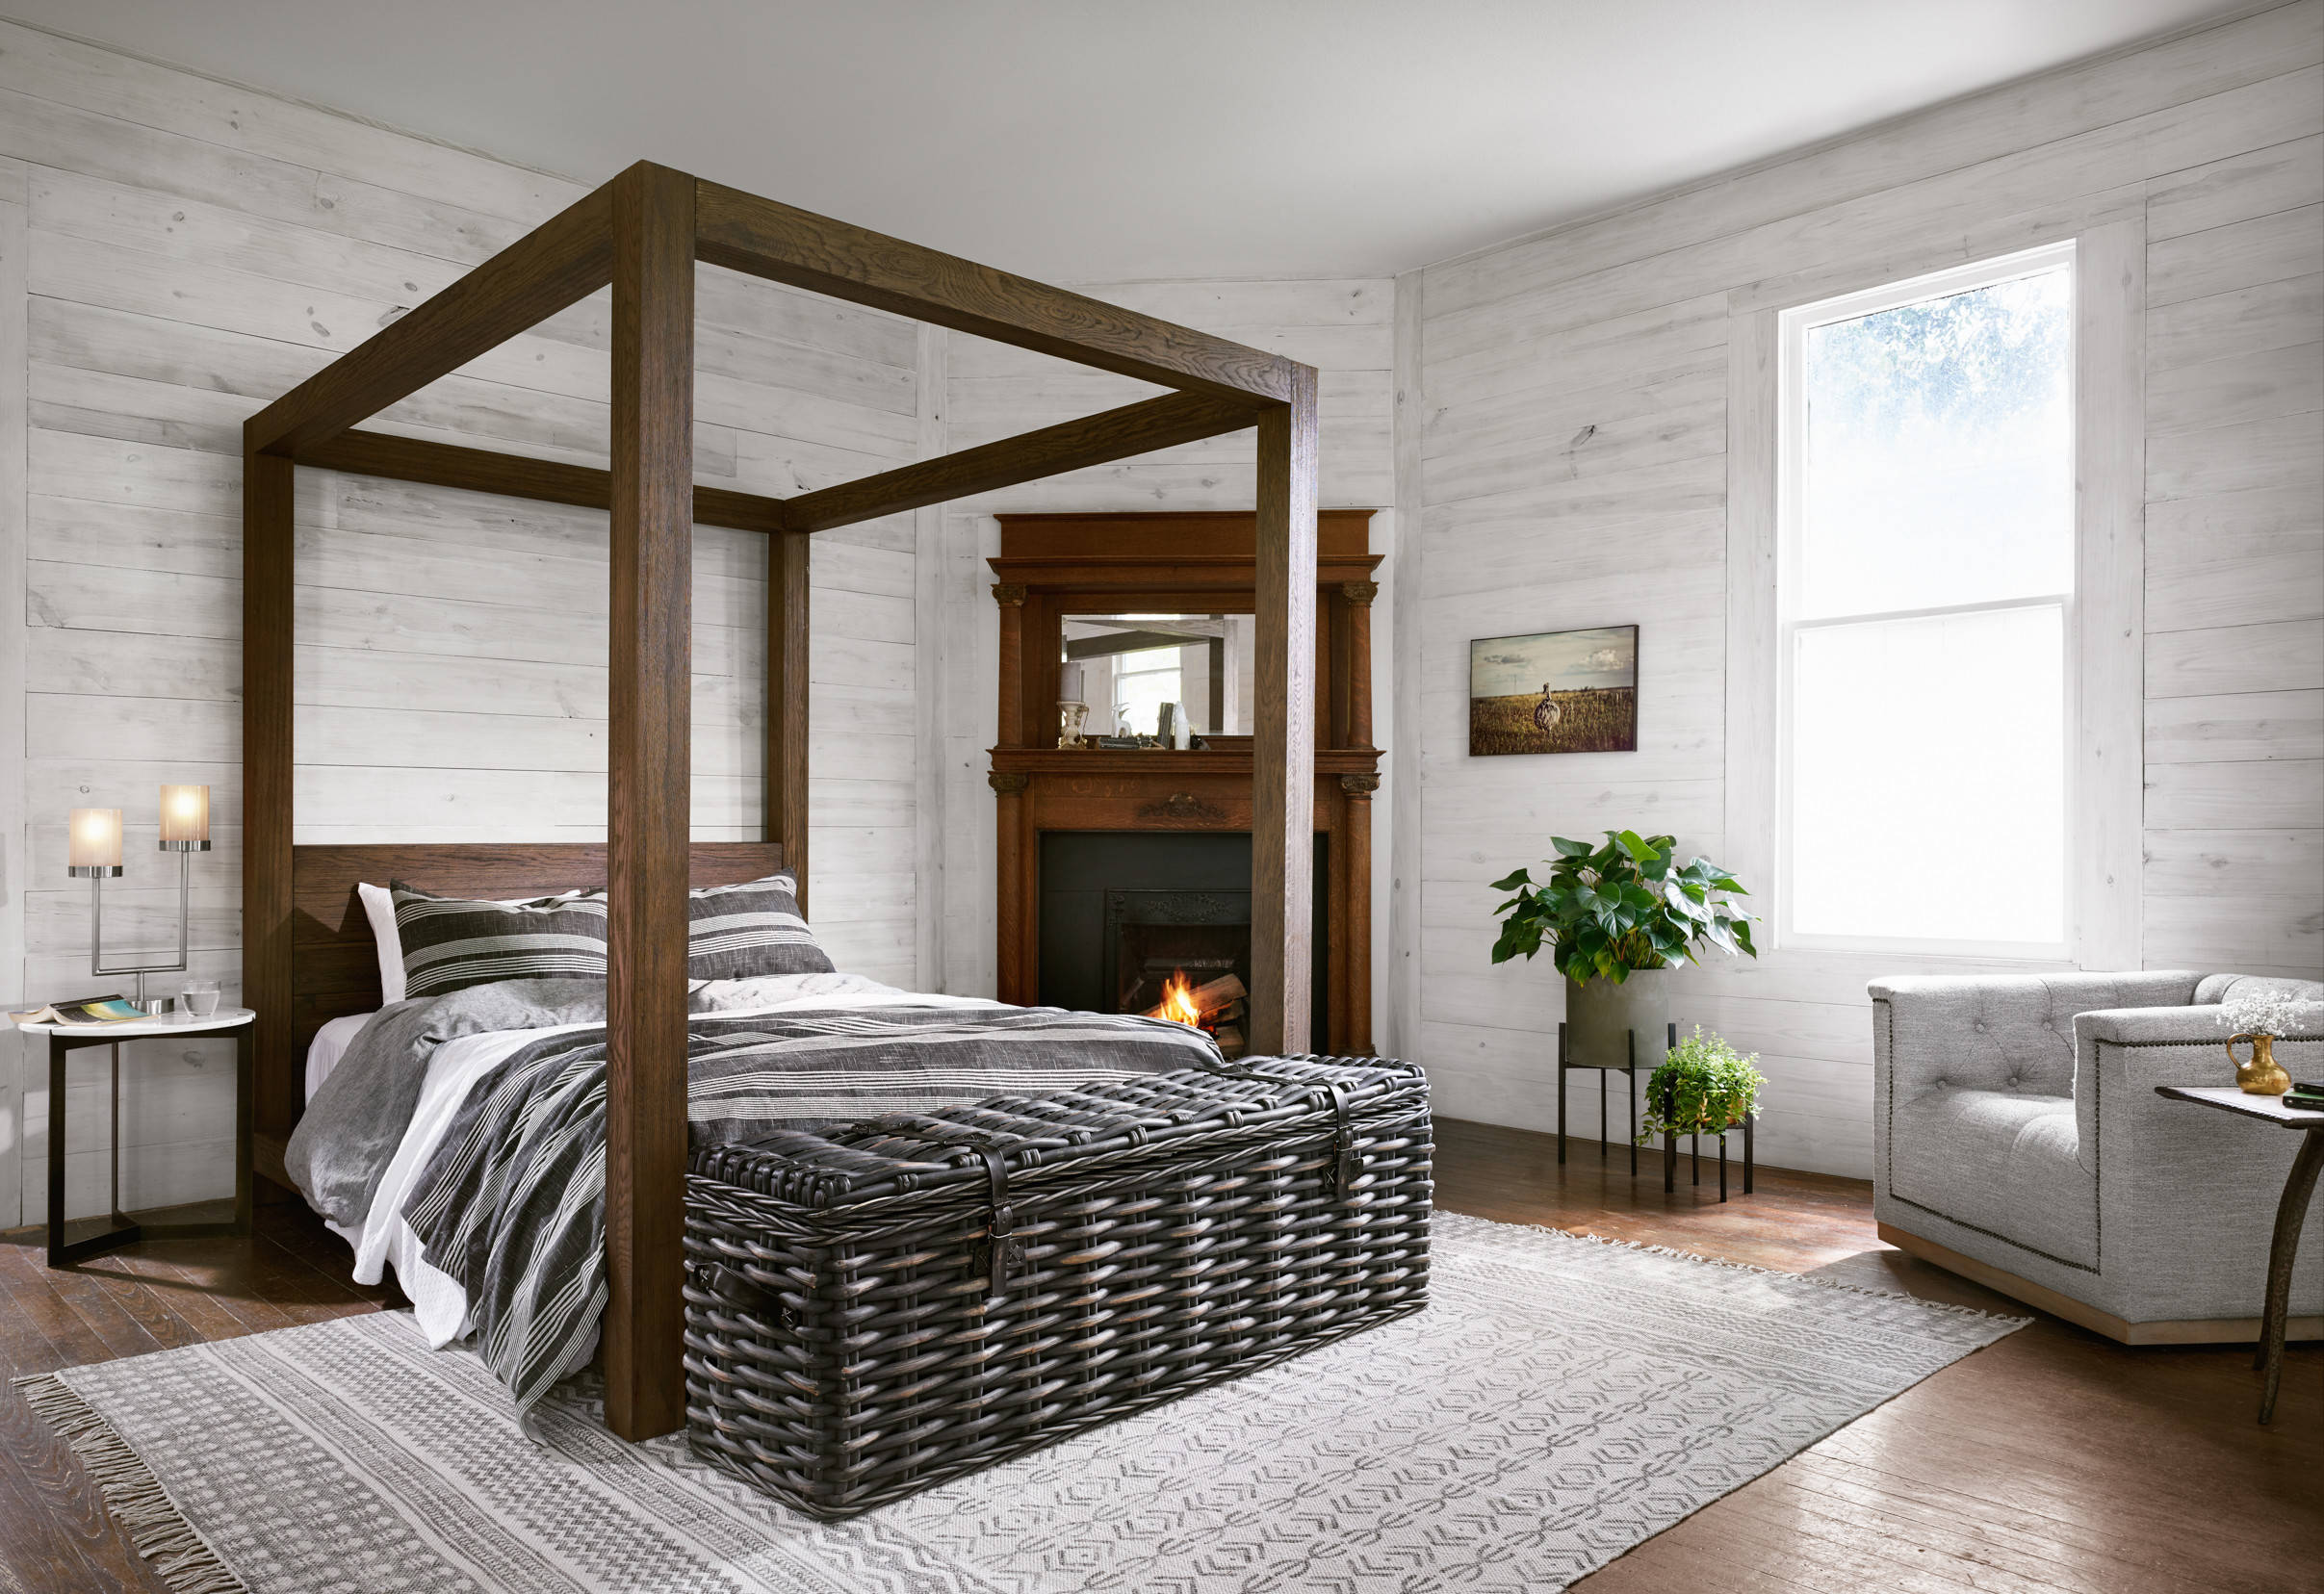 Branch Canopy Bed - Photos & Ideas | Houzz